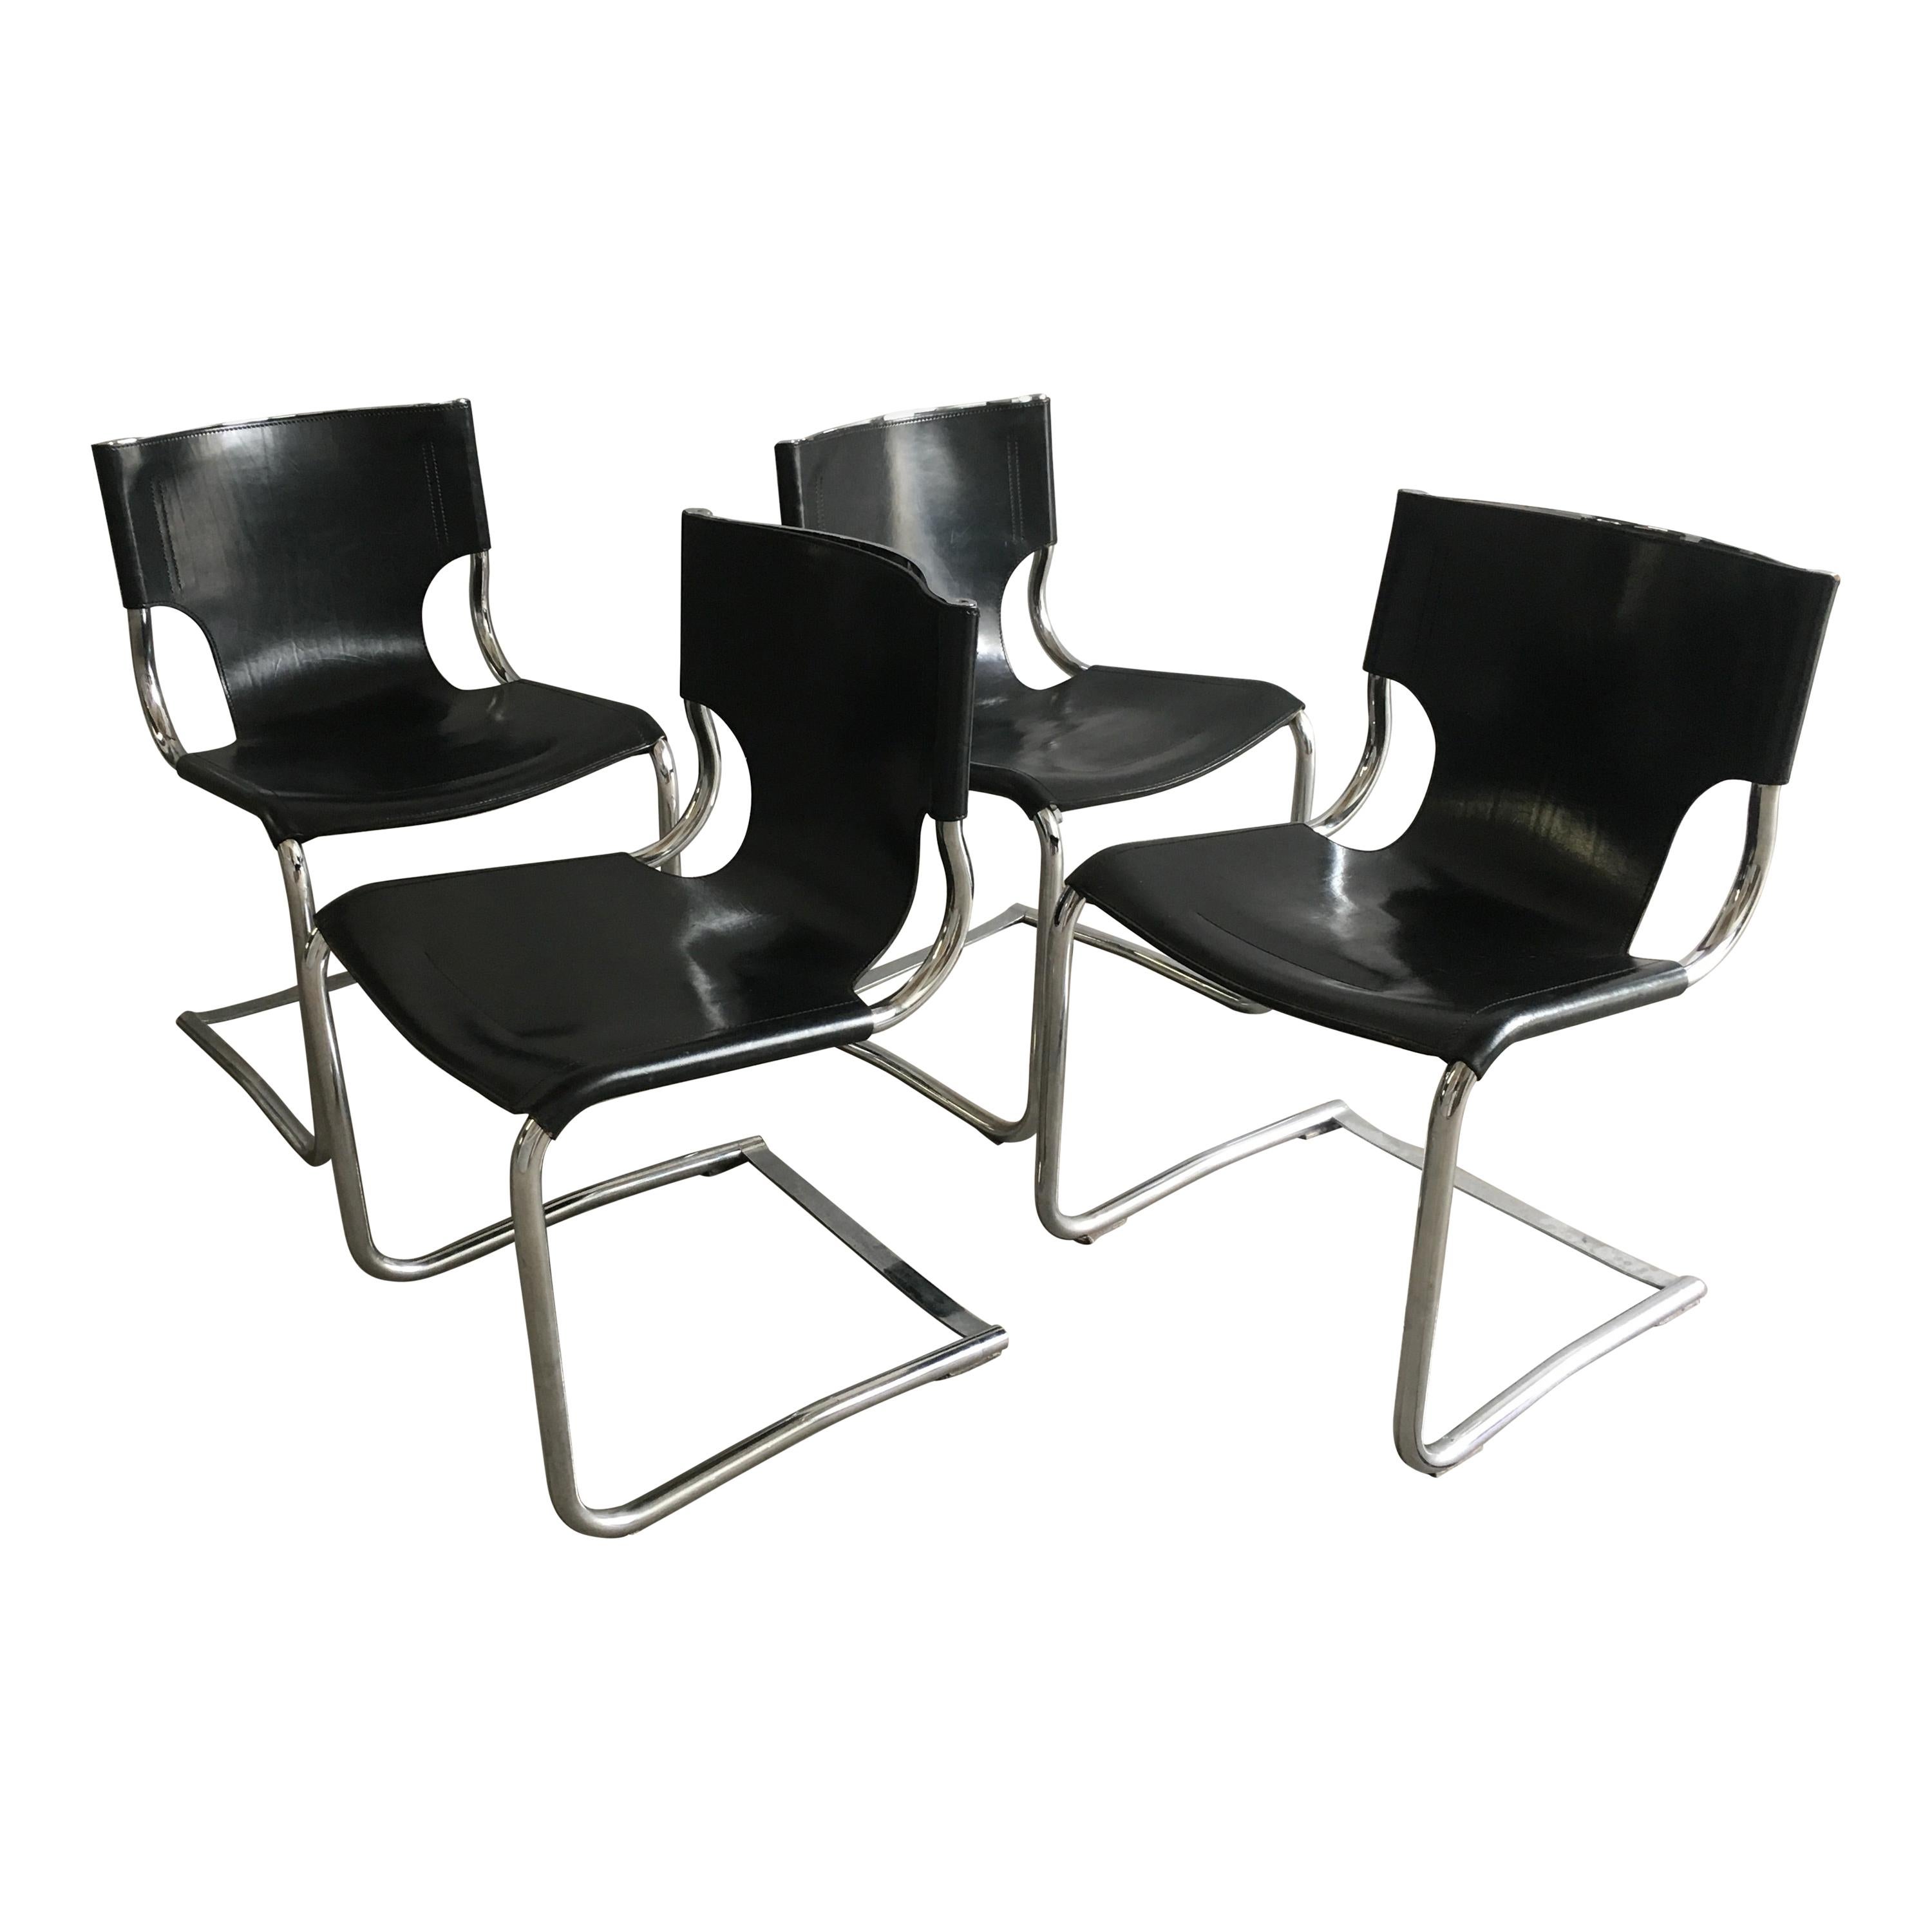 Mid-Century Modern Italian Set of 4 Chrome and Leather Chairs